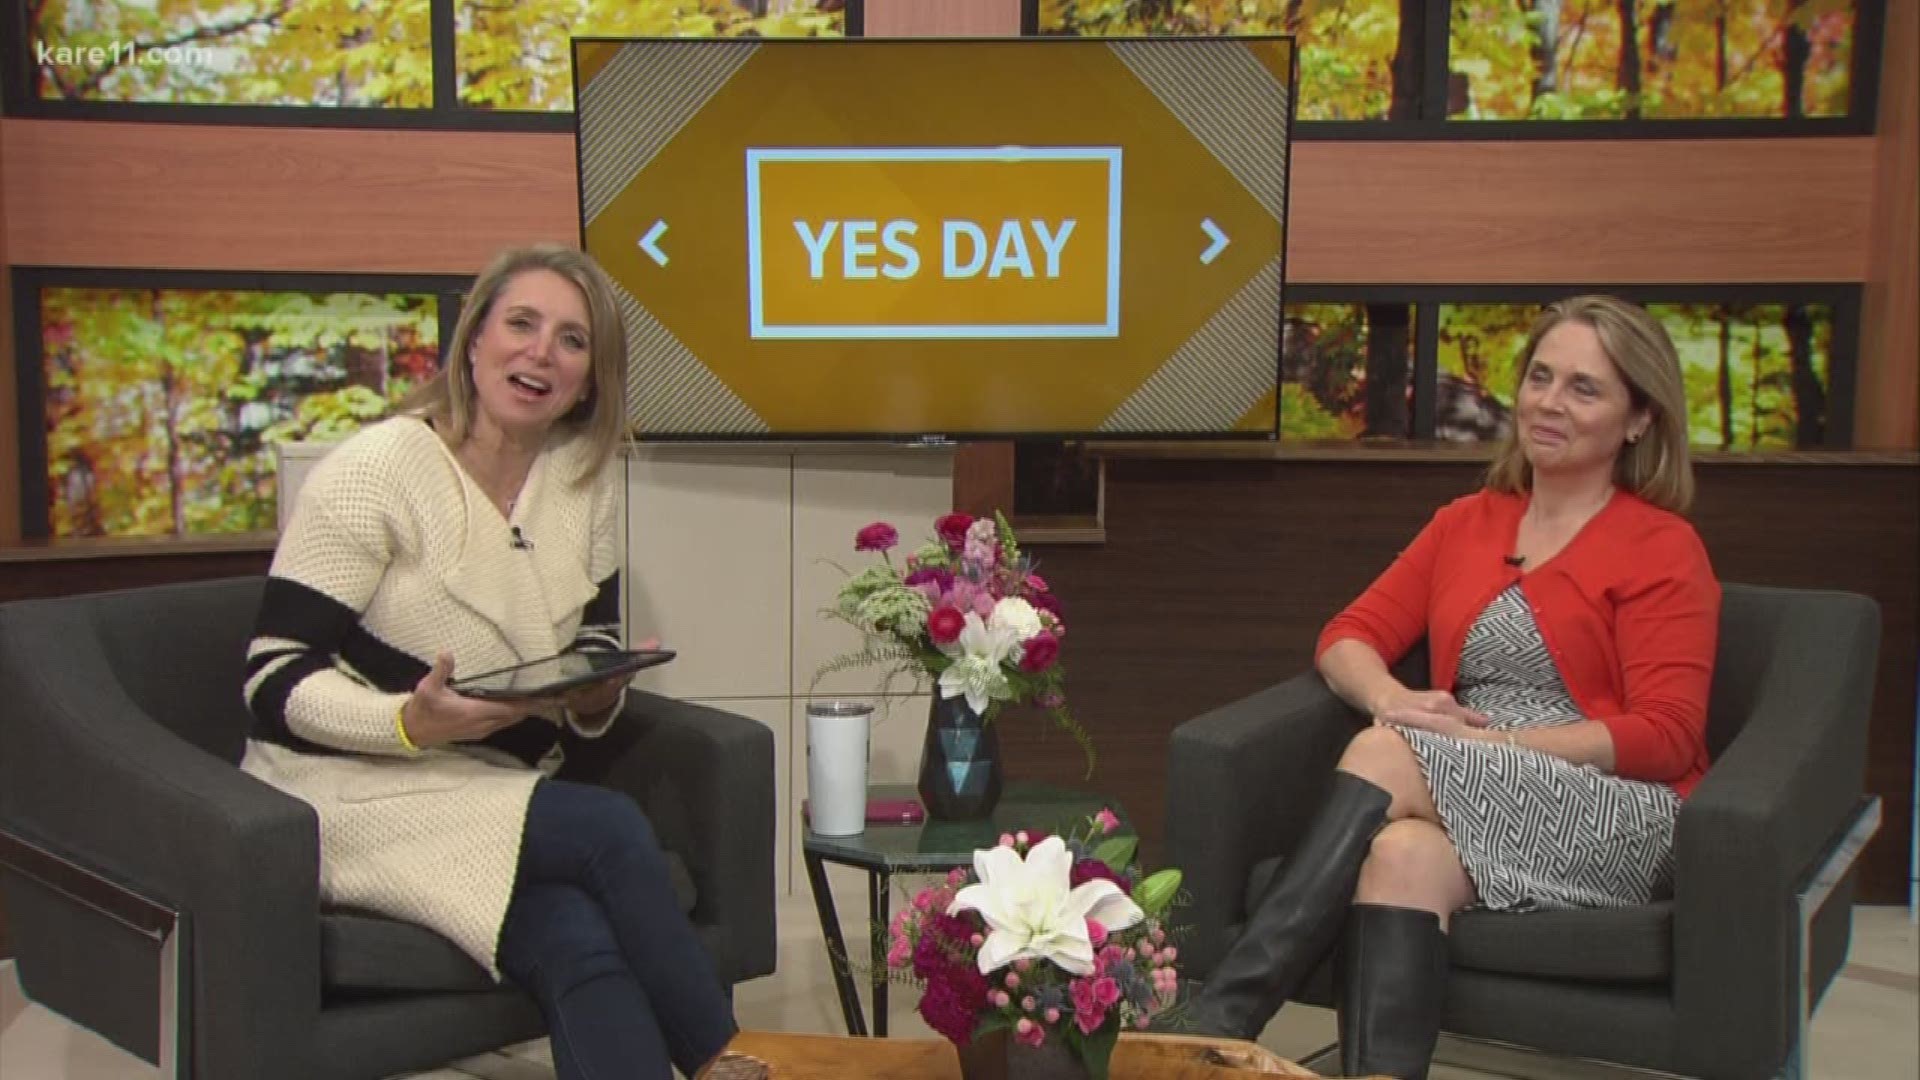 Belinda is joined by a childcare expert. Laura Davis let's us know about a new trend that has parents saying "yes!"